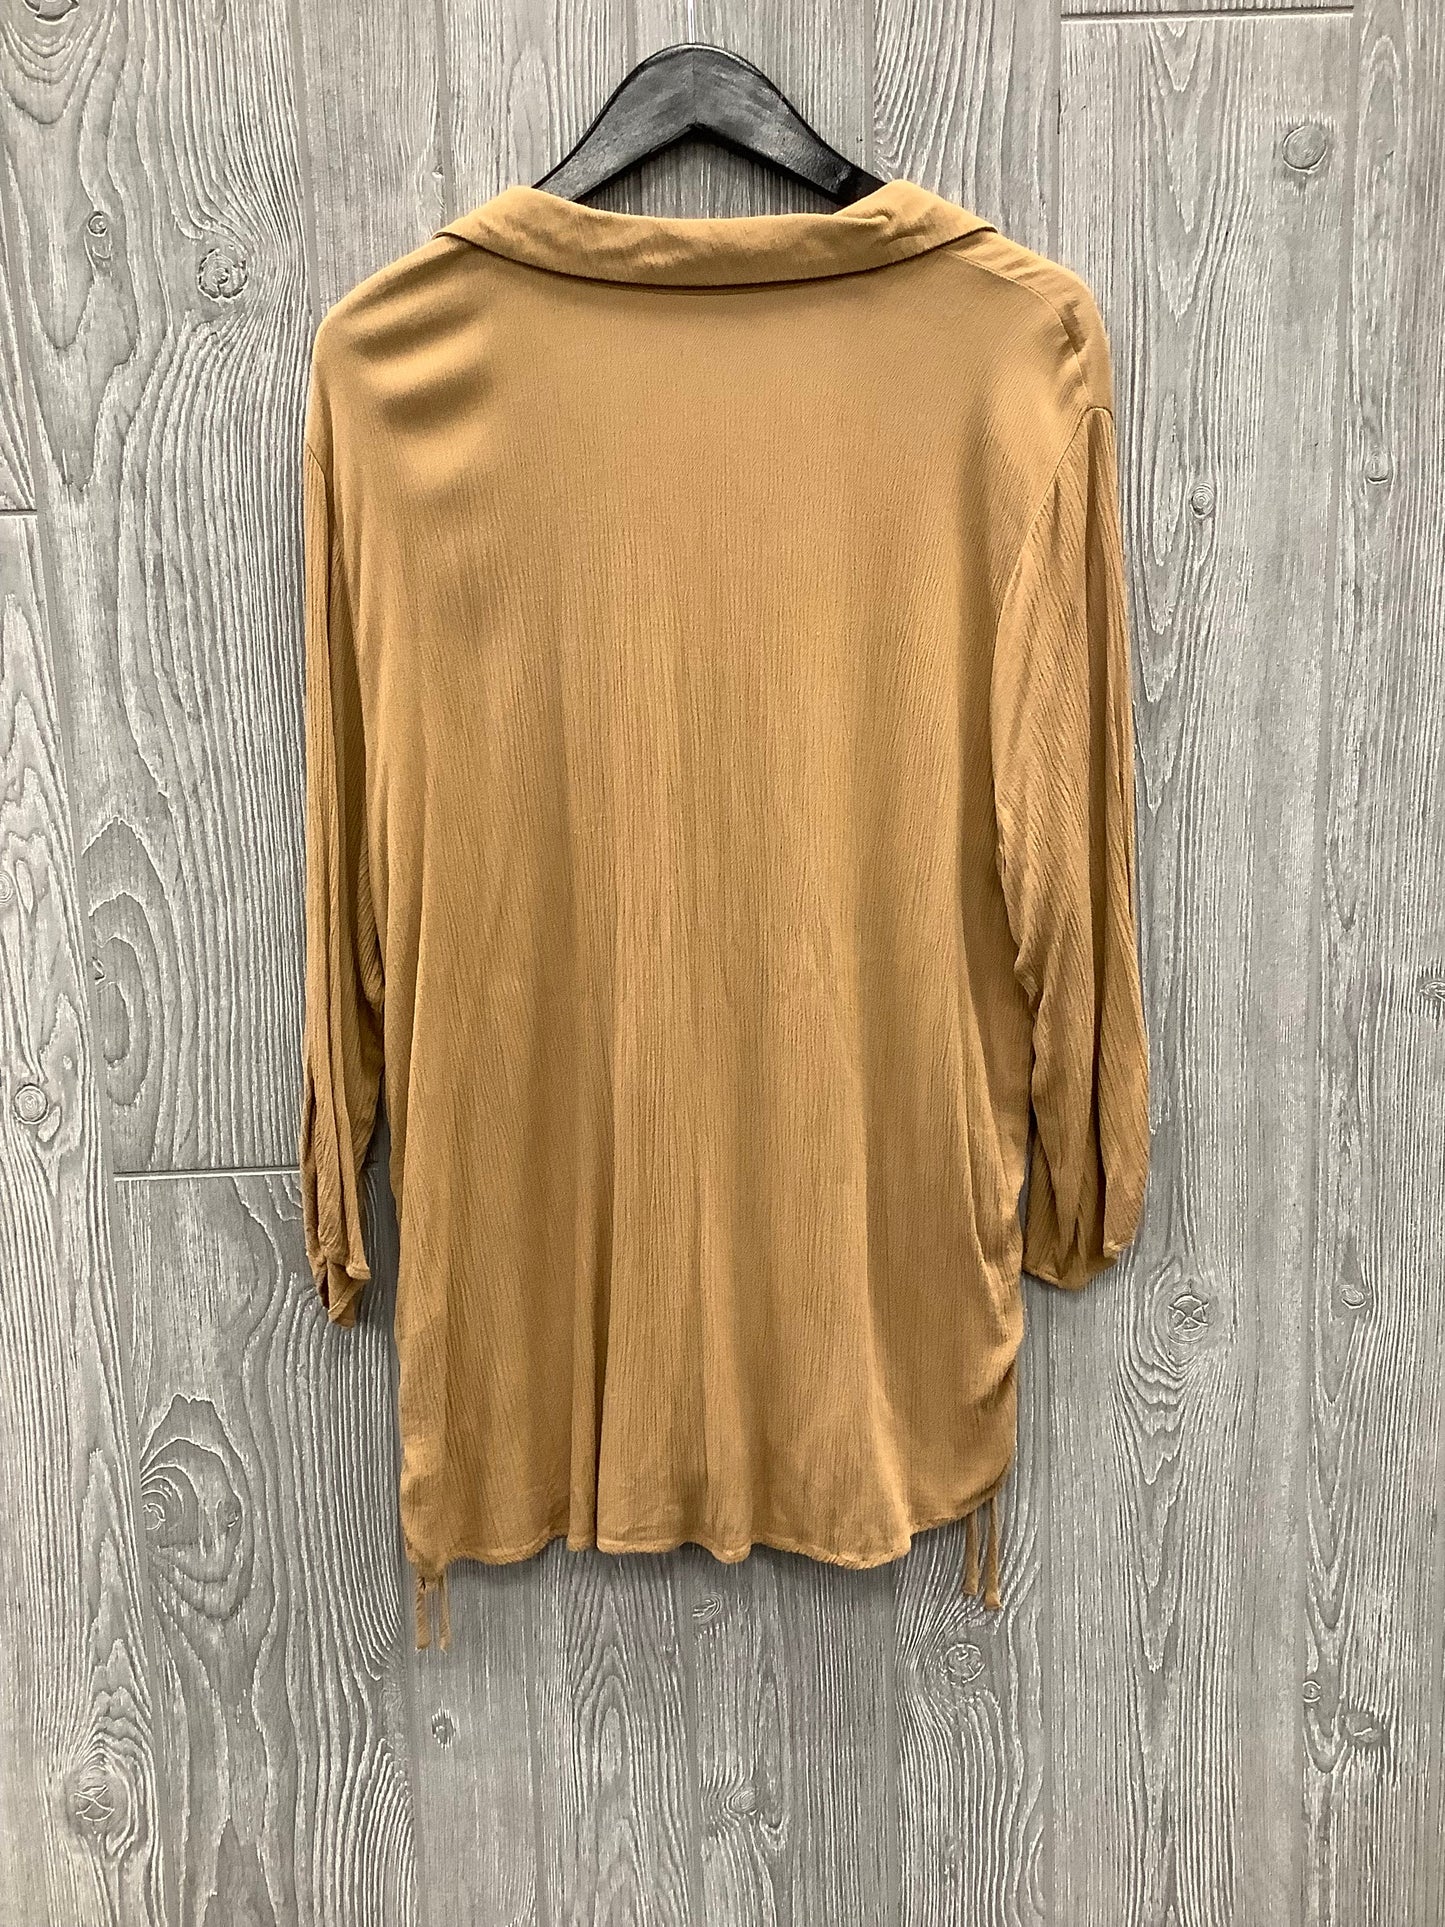 Blouse Long Sleeve By Cato  Size: 1x